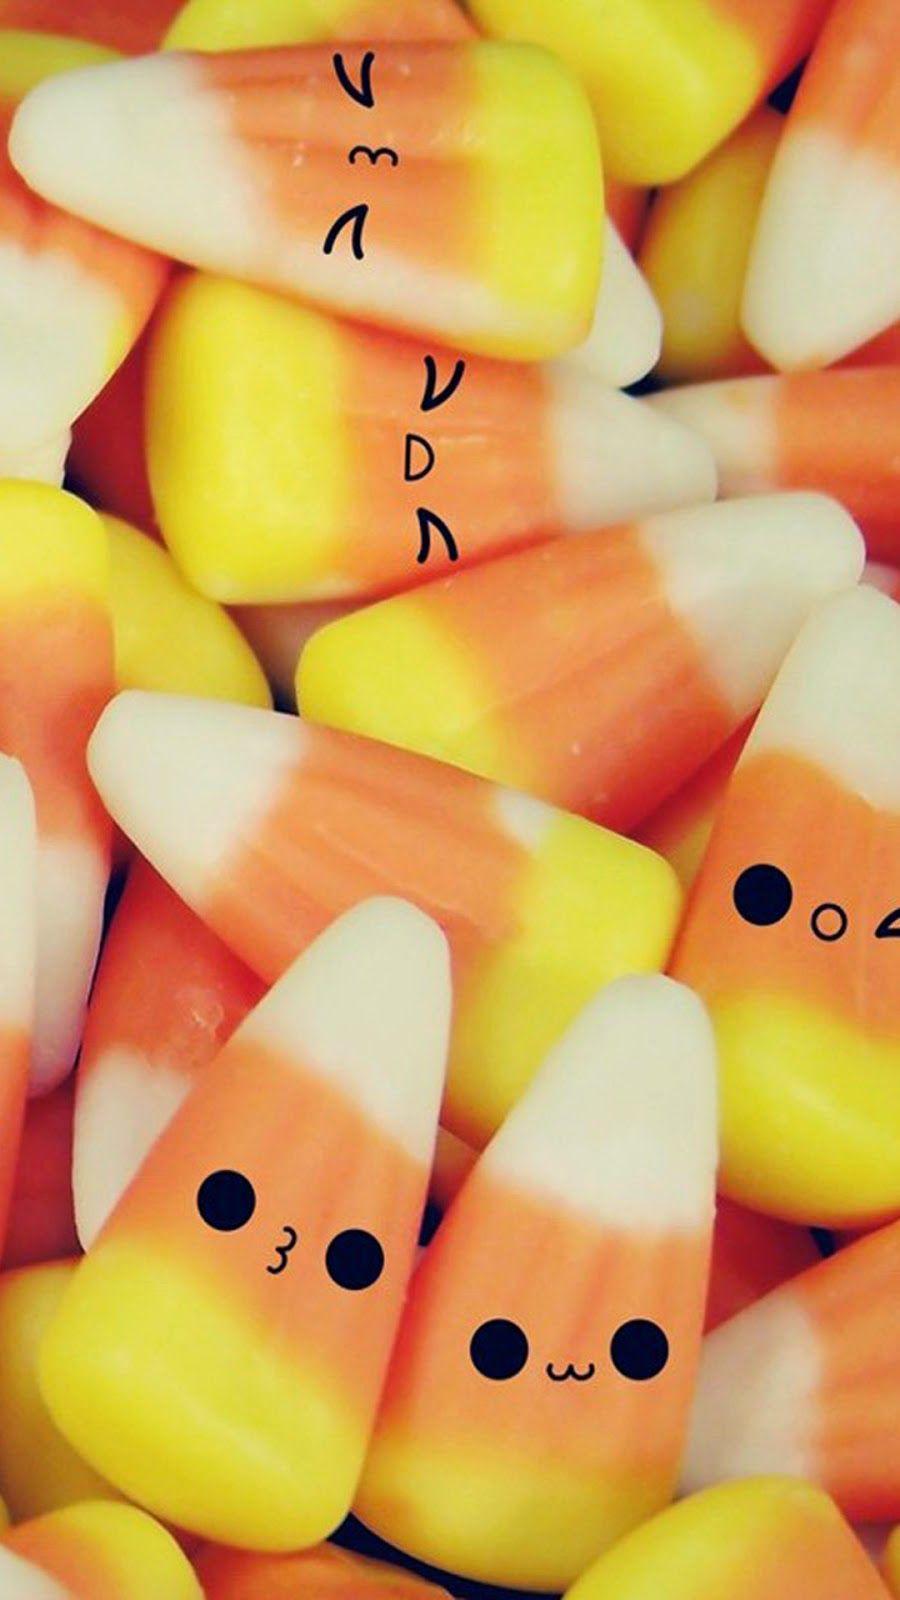 Cute Candy wallpaper on iPhone 6 Plus. Free Wallpaper Phone